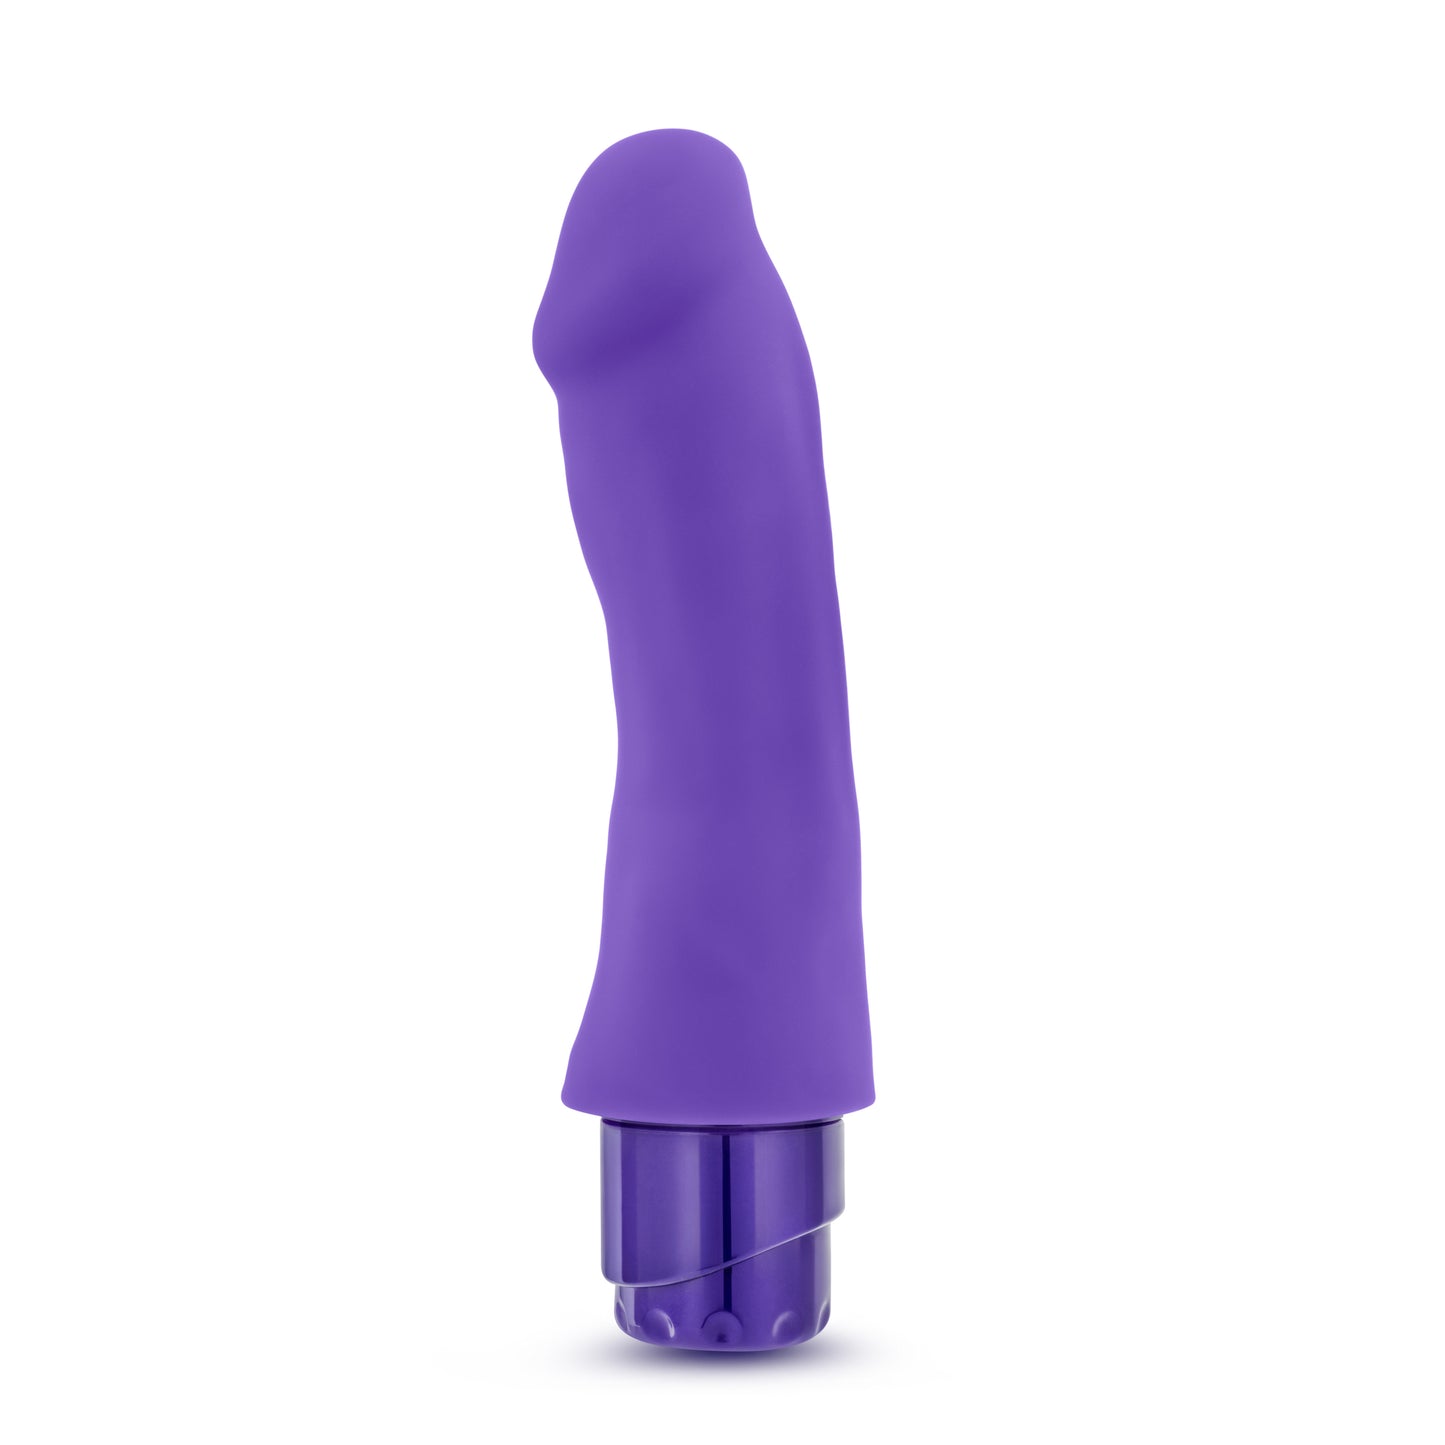 Luxe Marco Purple - Just for you desires